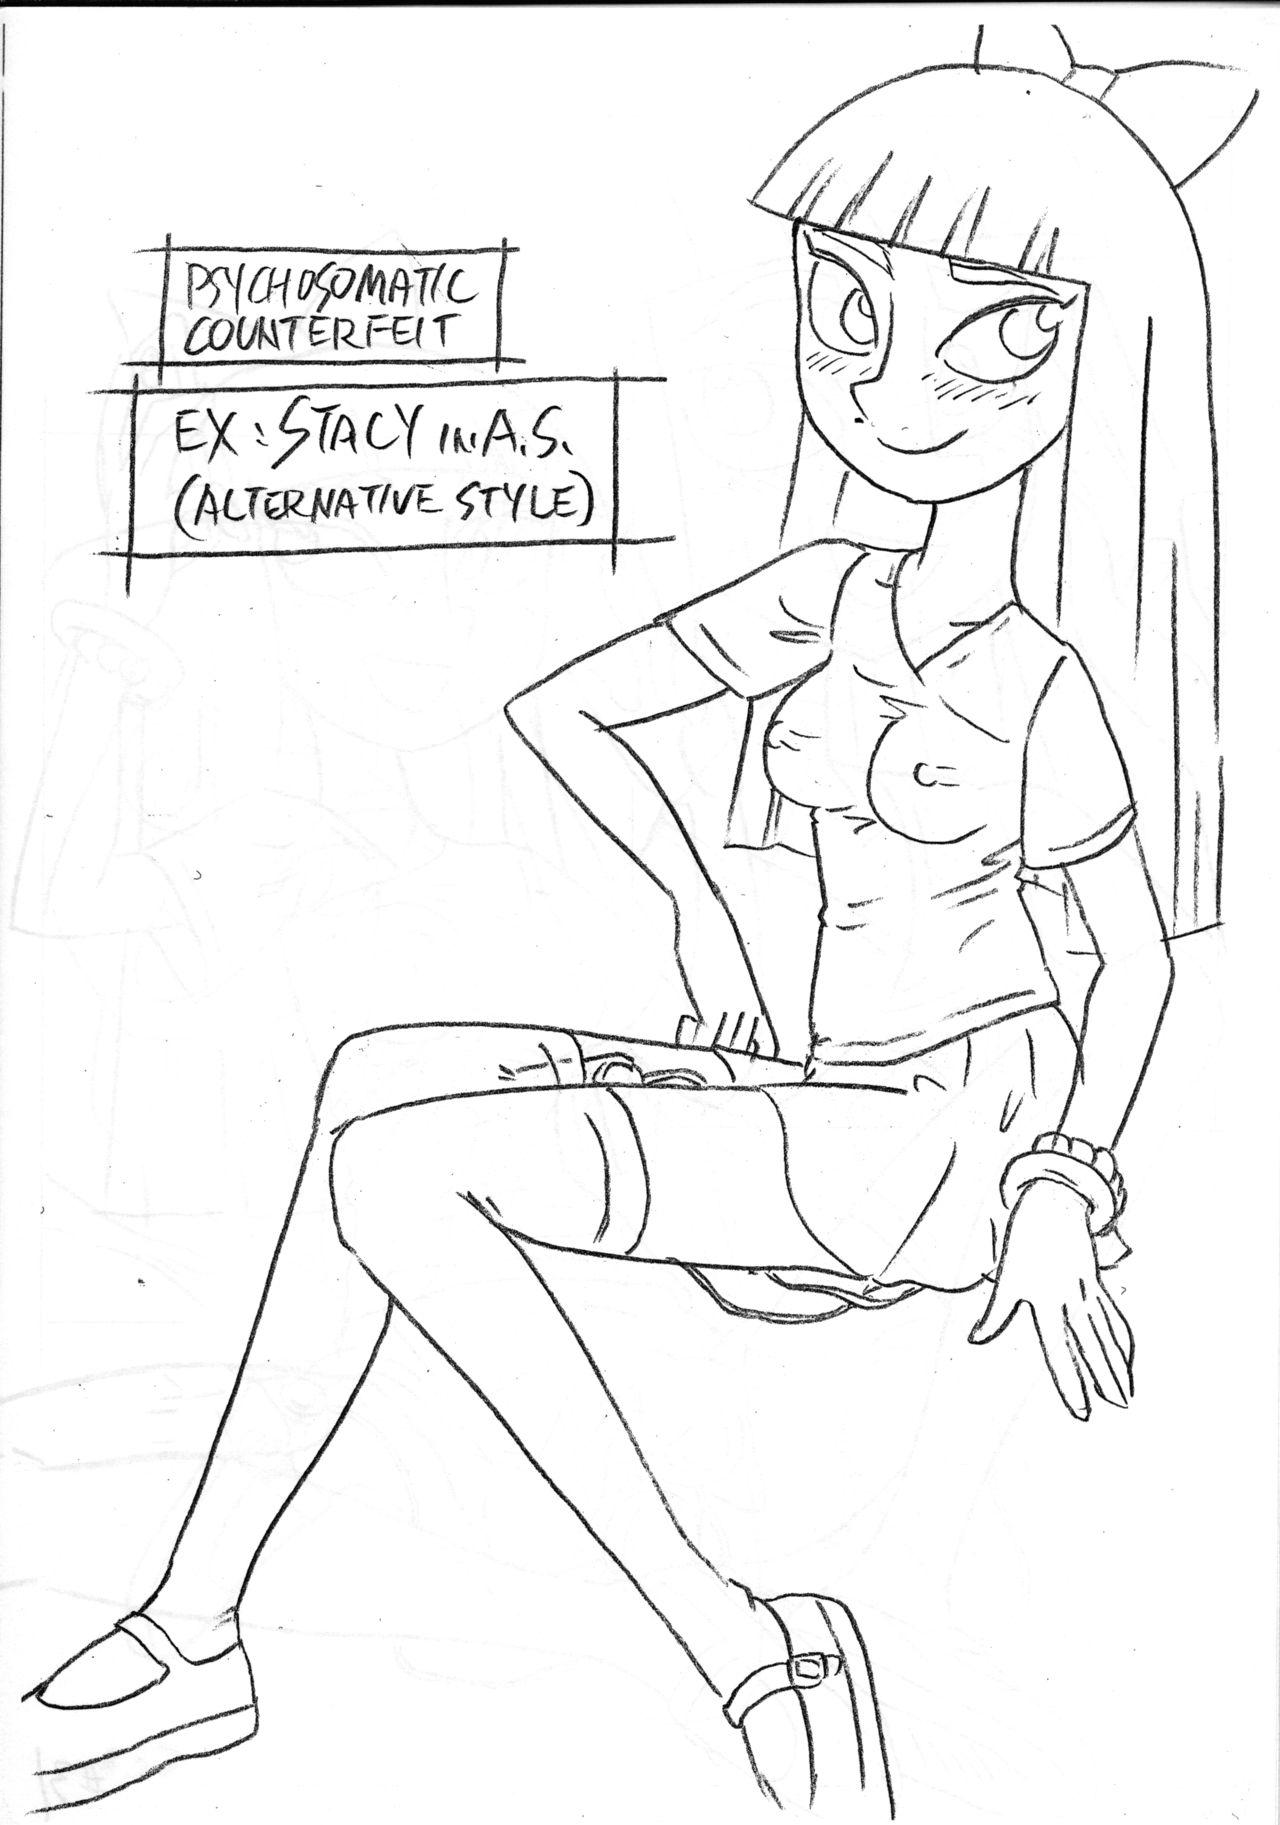 Petite Teenager Psychosomatic Counterfeit Ex: Stacy in A.S. - Phineas and ferb Movies - Page 31